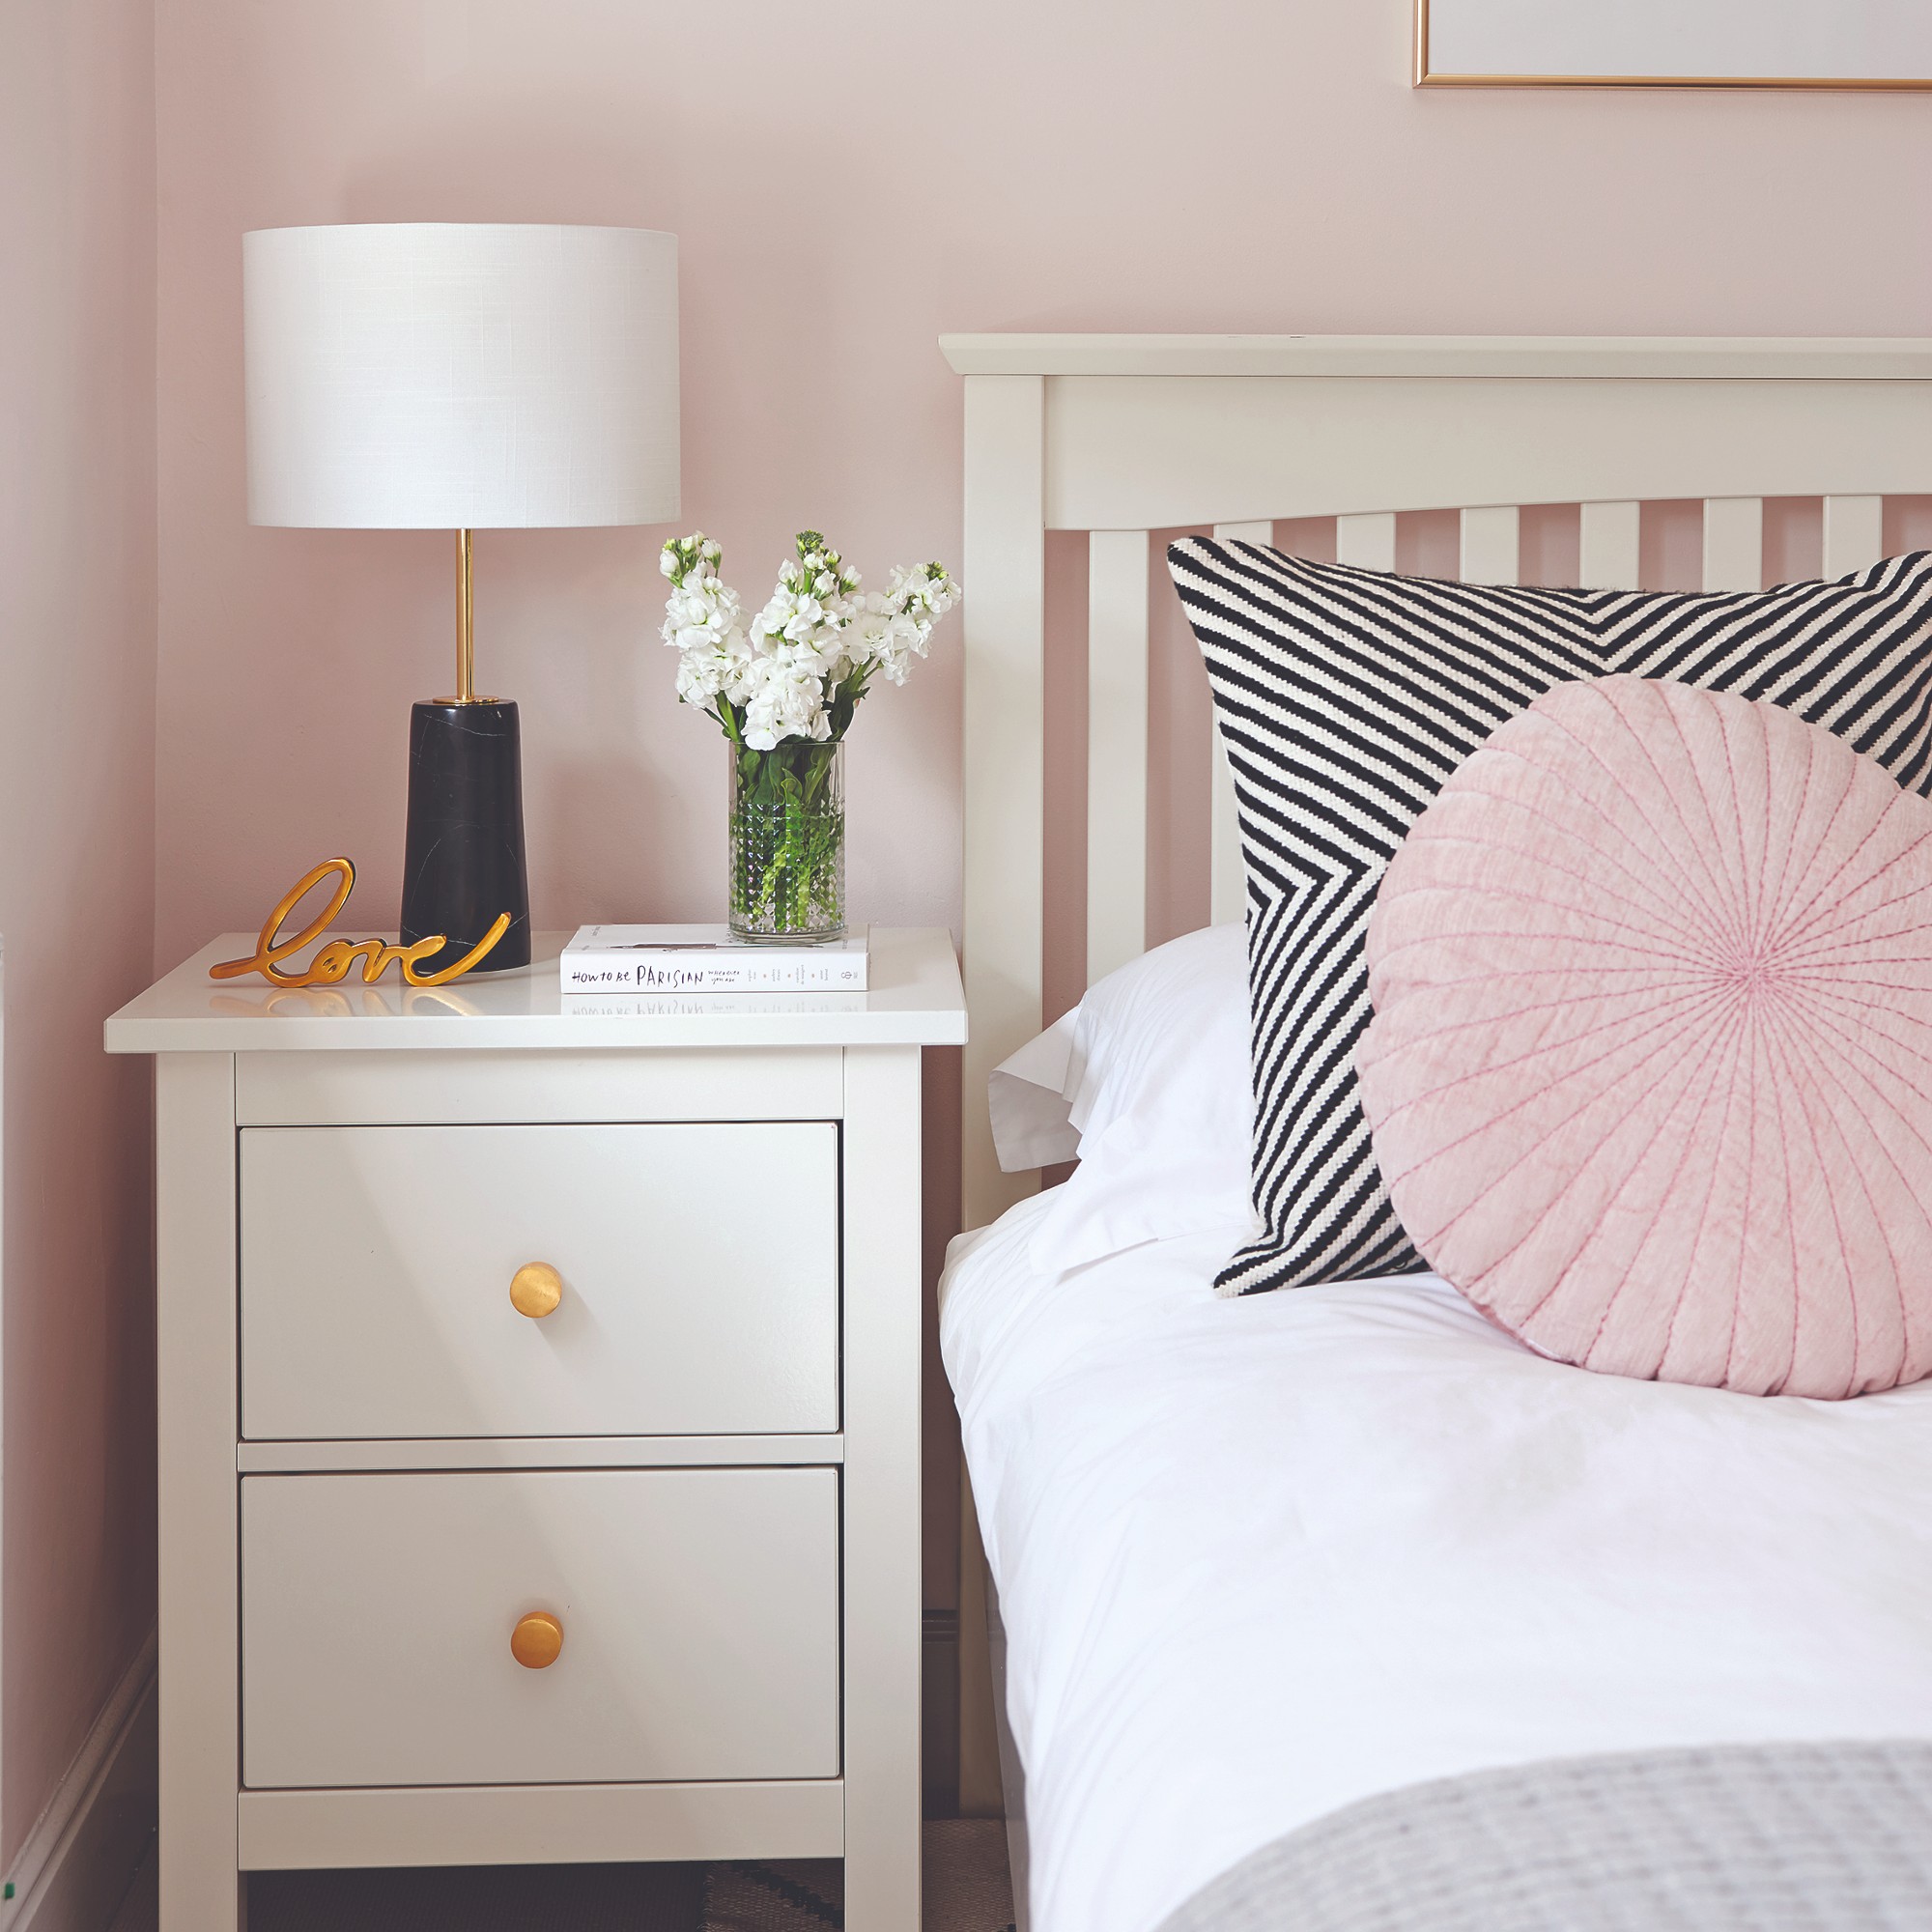 How tall should a bedside table be? Experts weigh in